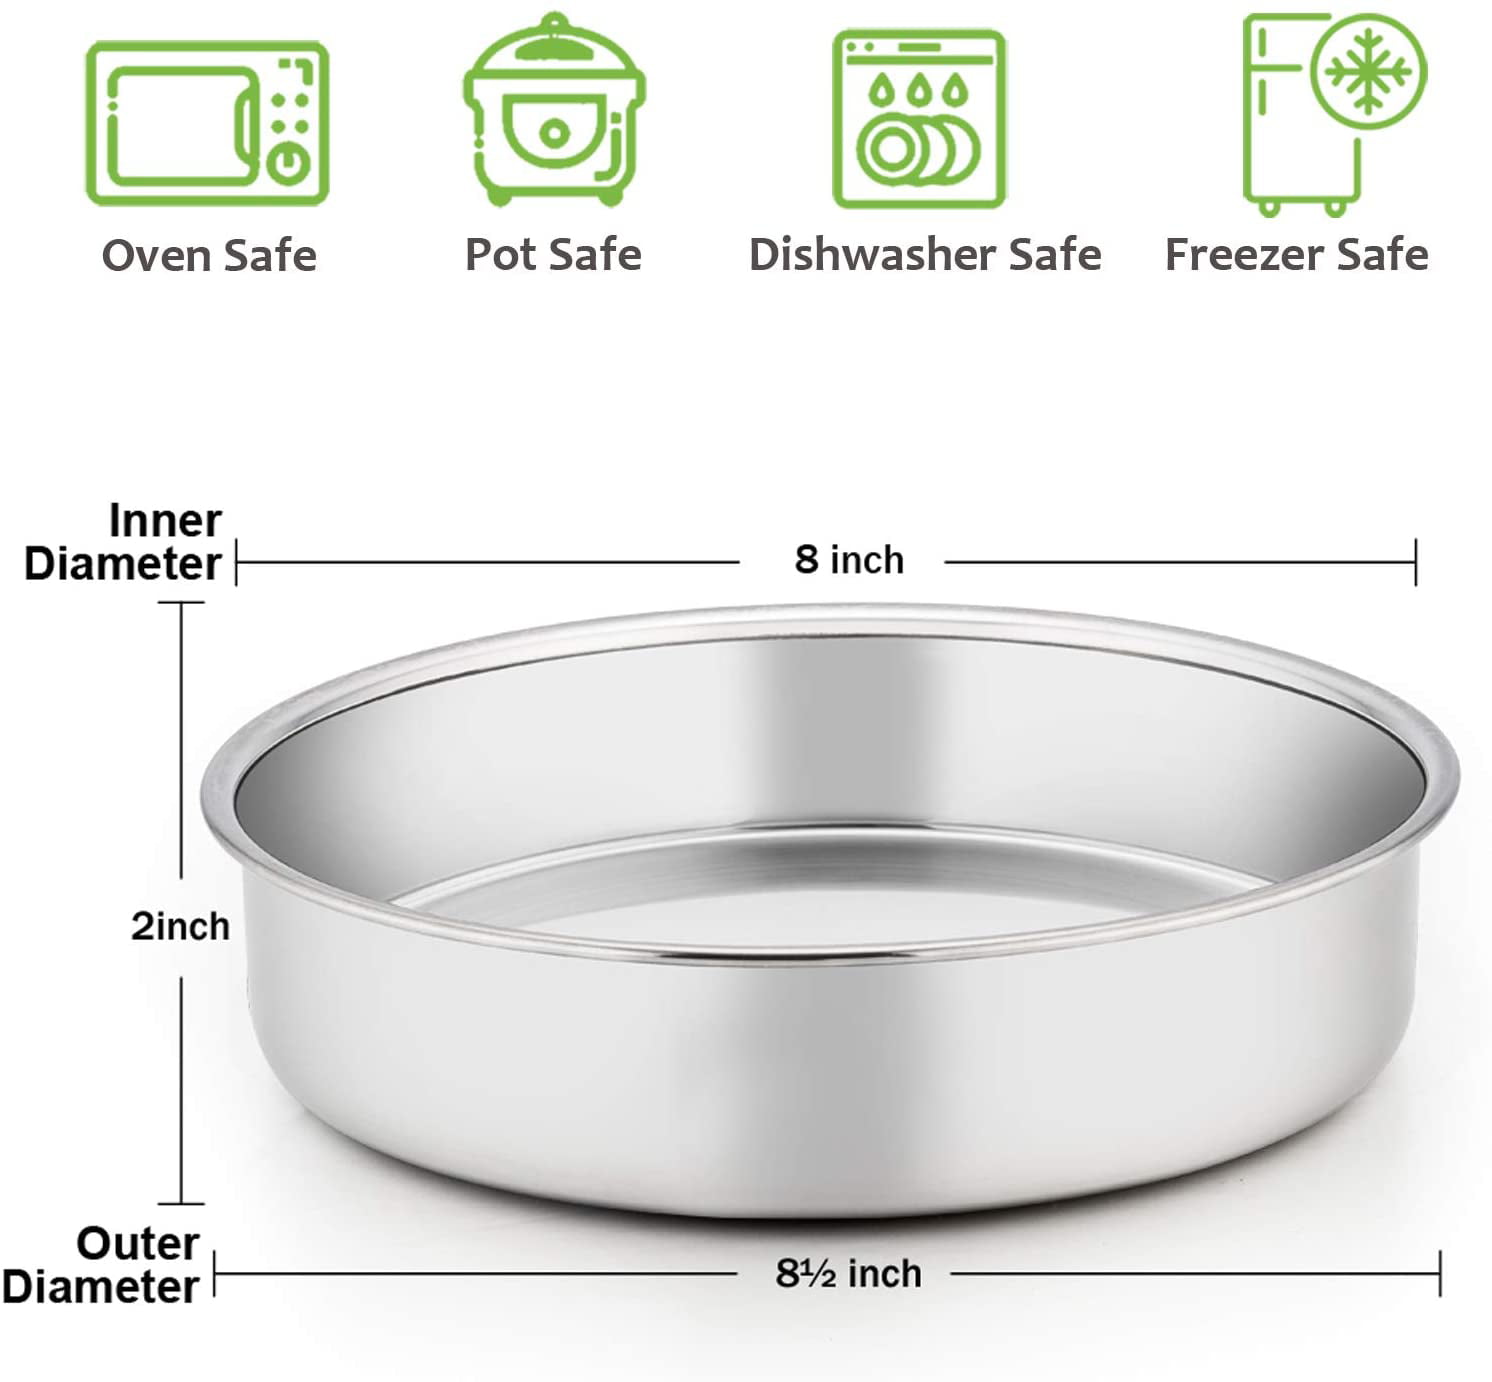 Deep Side & Mirror Finish 8 x 3 Inch Cake Pans Set of 2 P&P CHEF Round Baking Pan Stainless Steel Layer Birthday Wedding Cake Oven Pans Non Toxic & Heavy Duty Easy Clean & Dishwasher Safe 